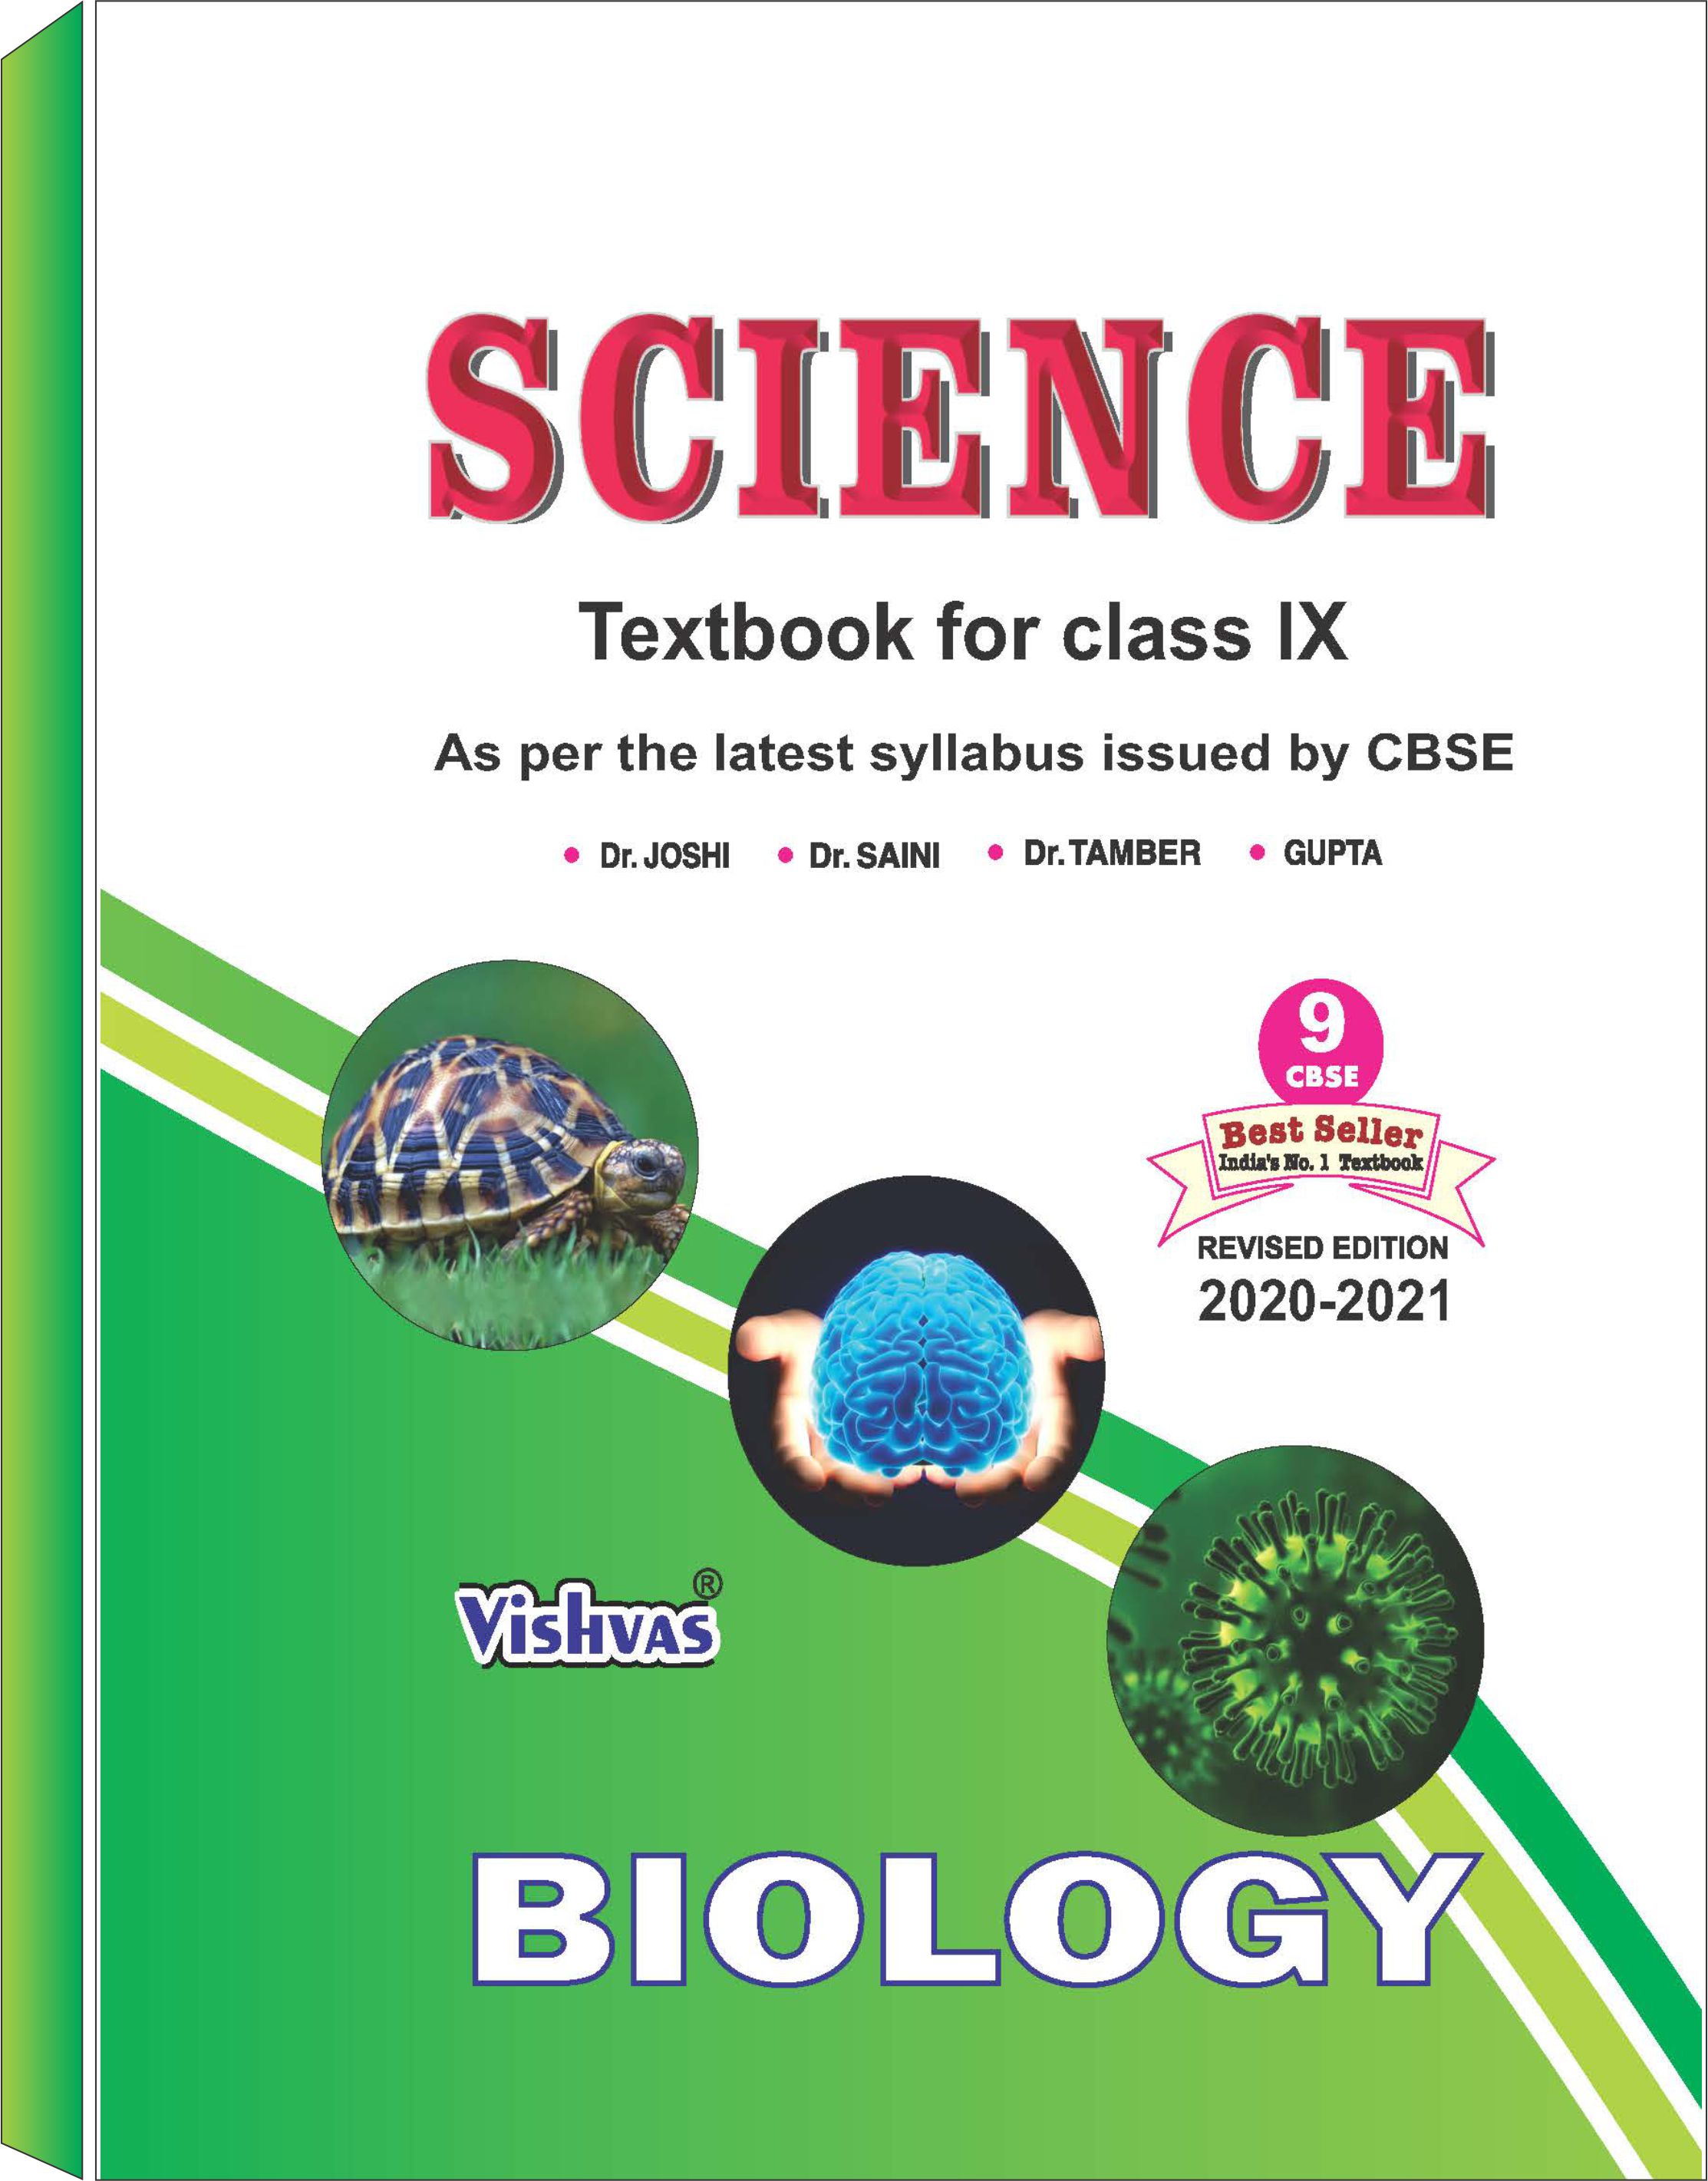 SCIENCE (BIOLOGY) TEXTBOOK FOR CLASS-IX, AS PER REVISED SYLLABUS ISSUED BY CBSE-2020-21